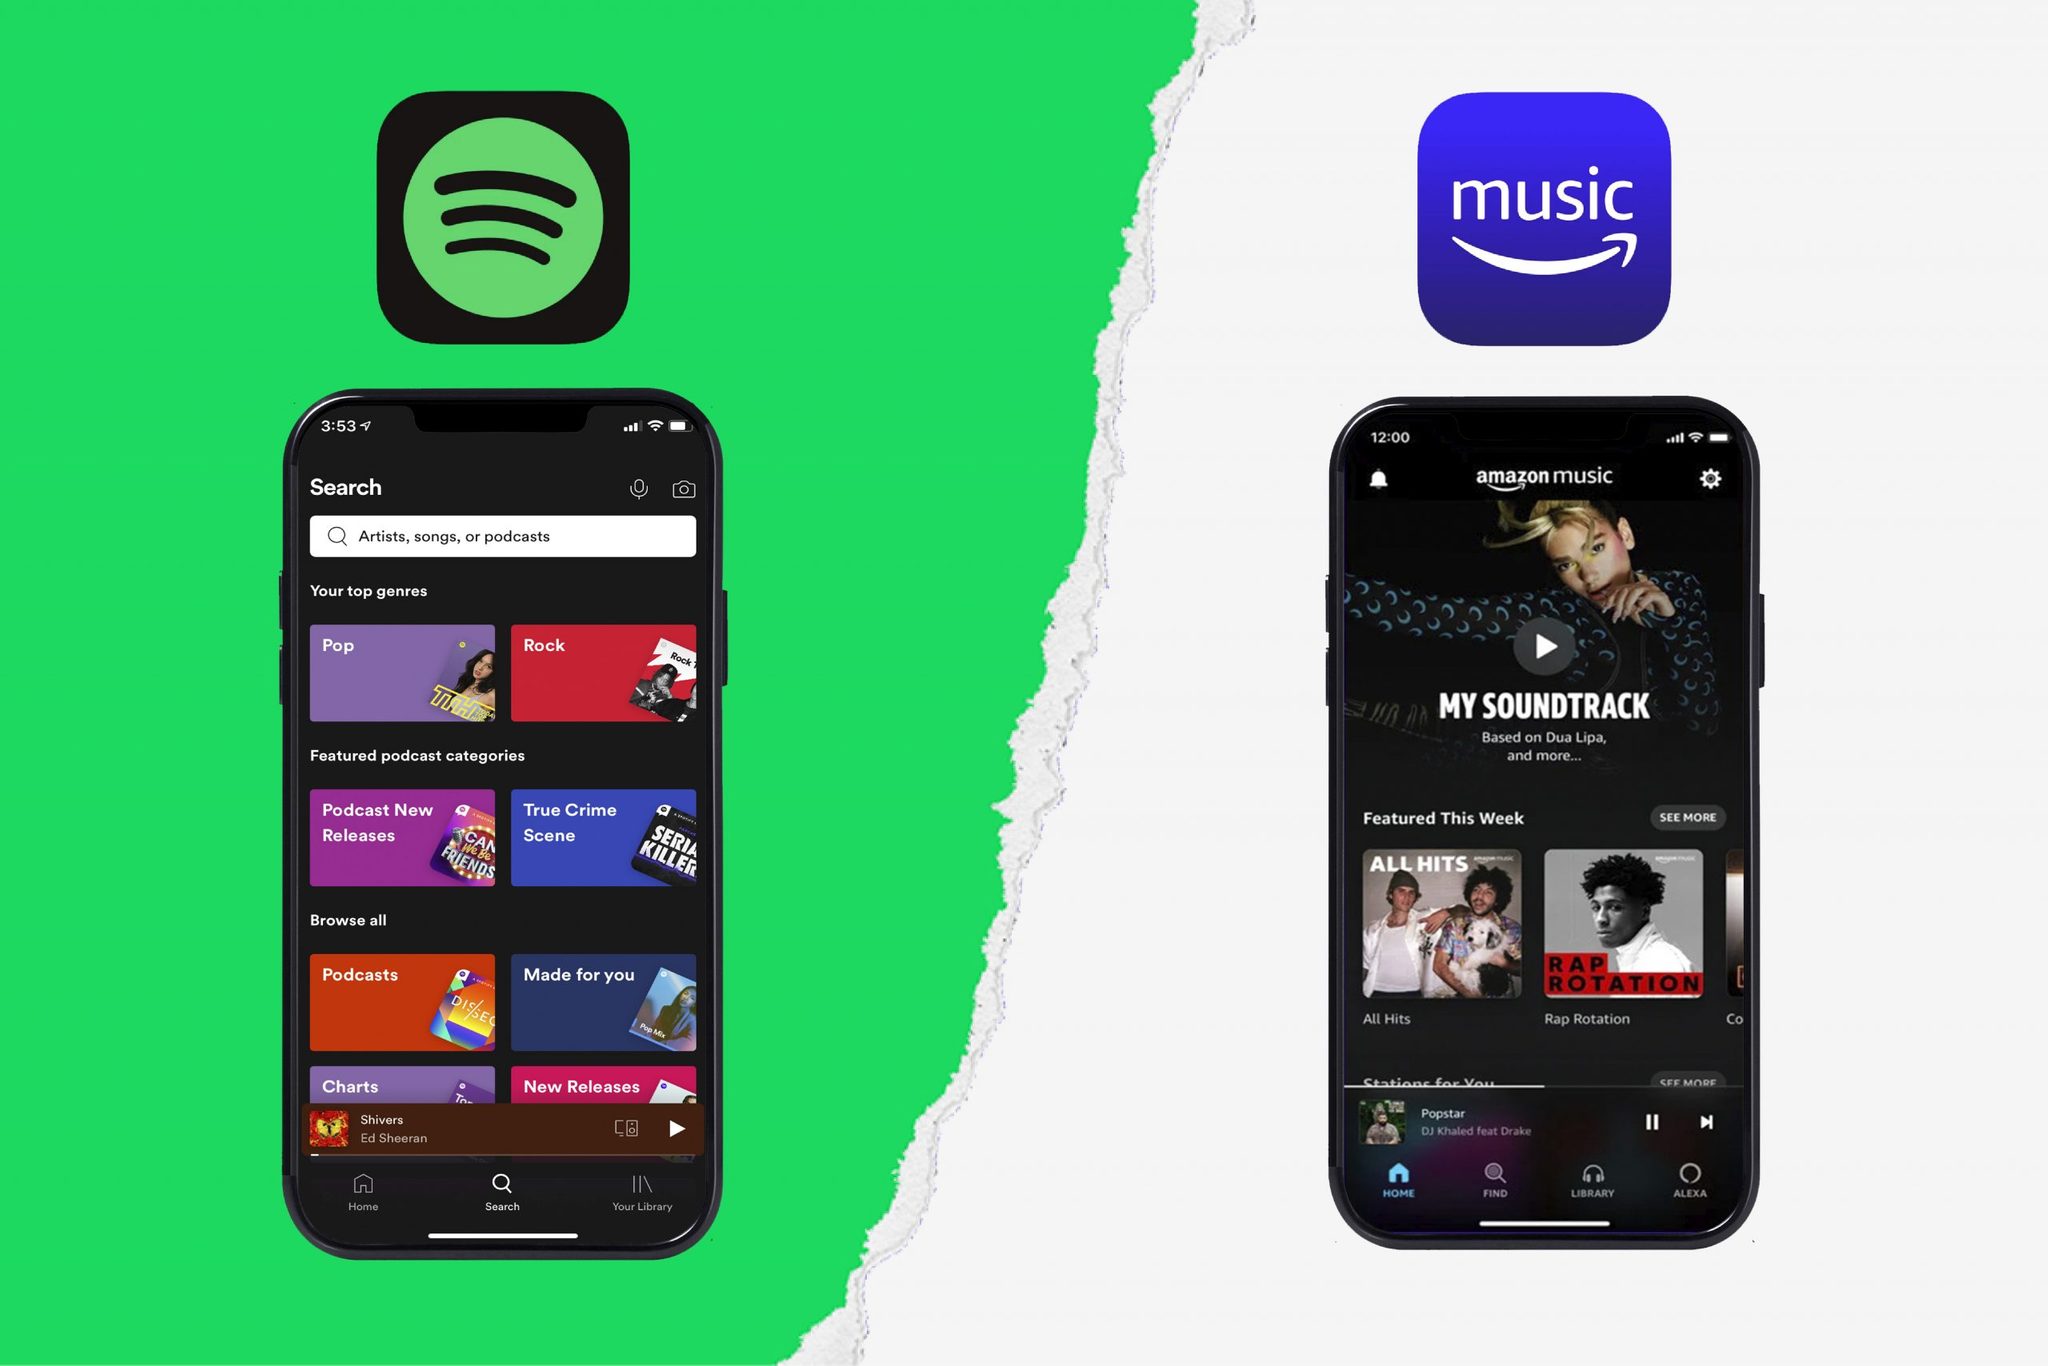 Amazon Music vs. Spotify Which Streaming Service Is Better?